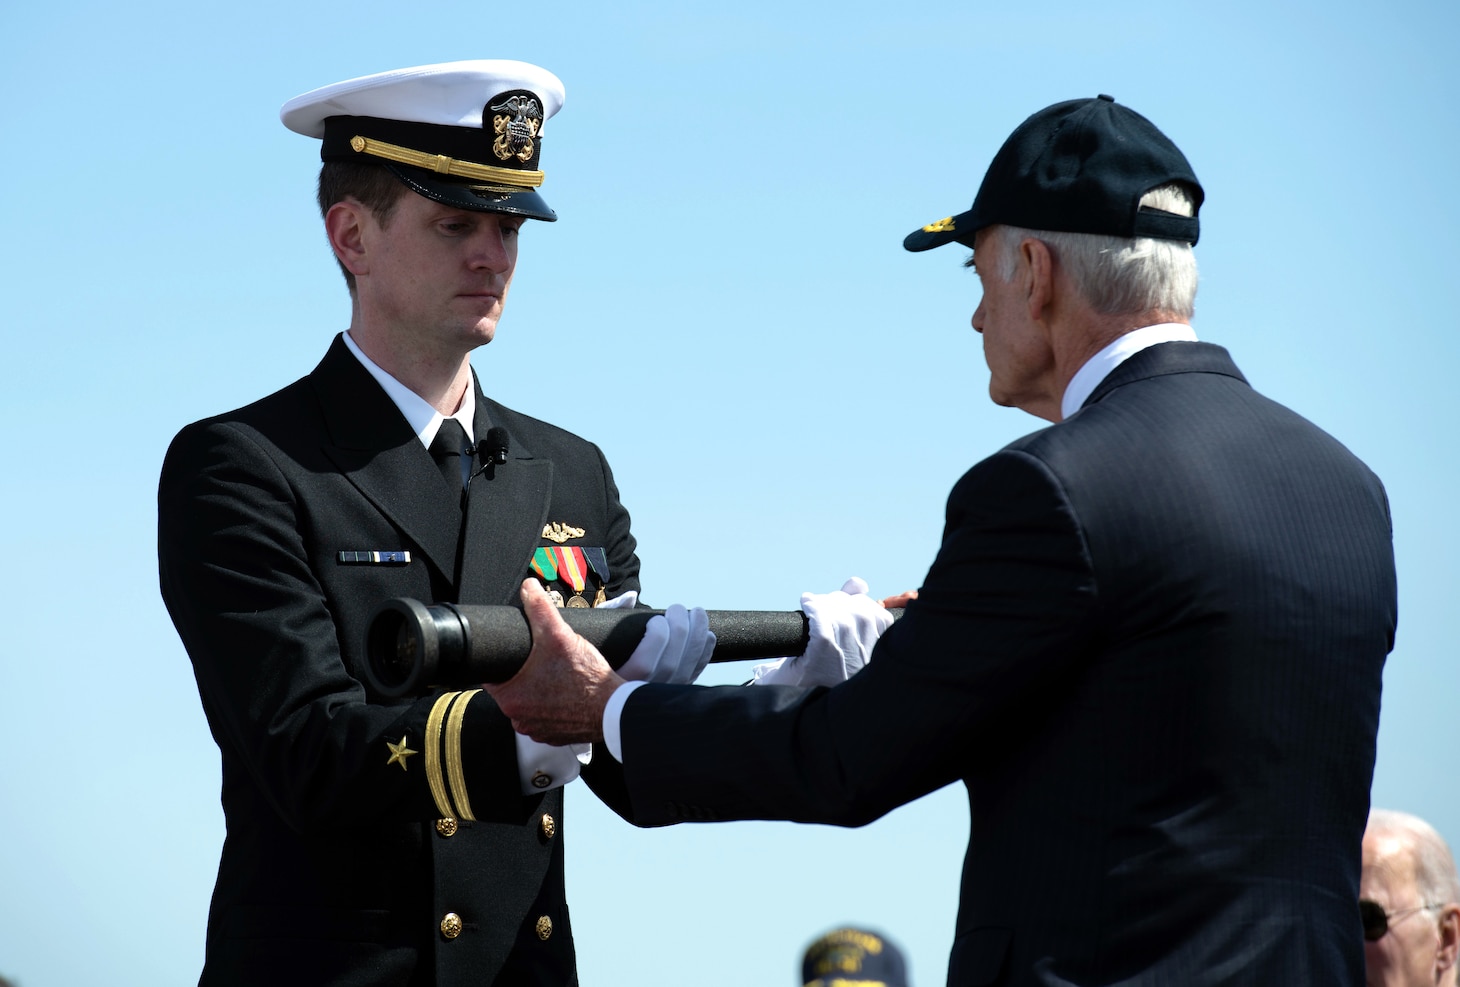 U.S Sen. Tom Carper of Delaware presents a ceremonial spyglass to Lt. Stephen Walsh during a commissioning commemoration ceremony for the Virginia-class submarine USS Delaware (SSN 791) in Wilmington, Delaware April 2, 2022.